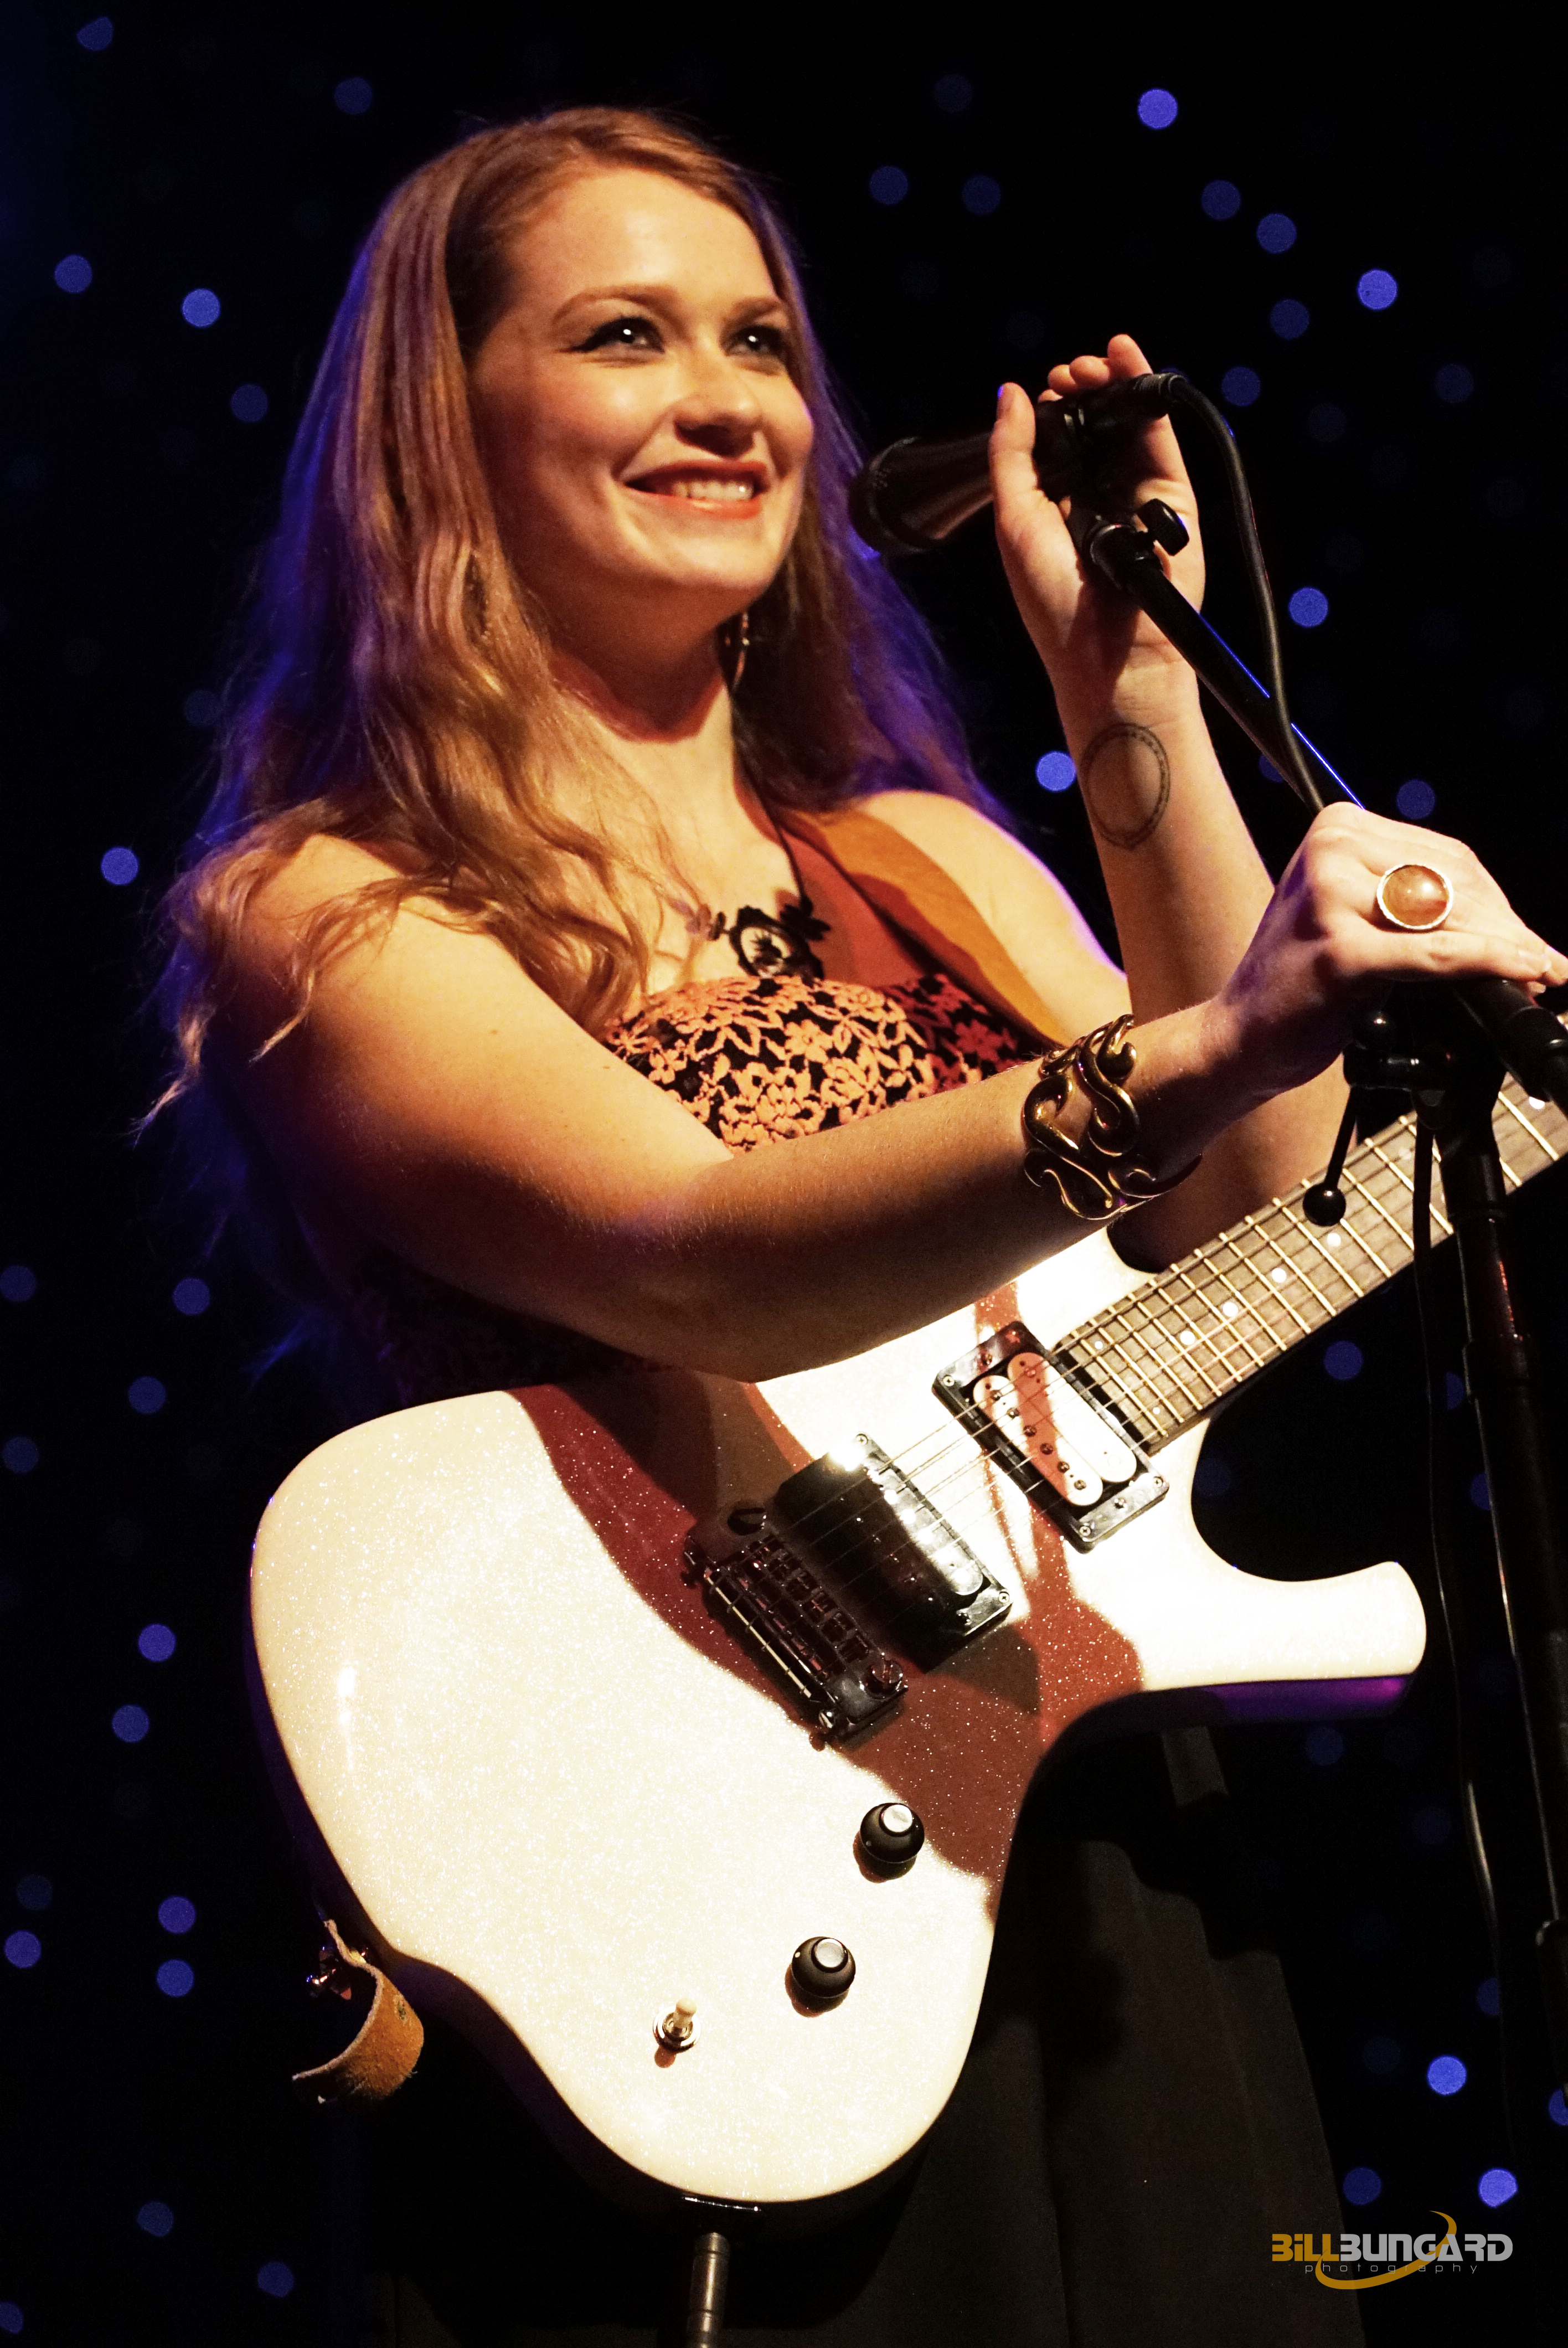 Whitney Lyman at The Triple Door (Photo by Bill Bungard)